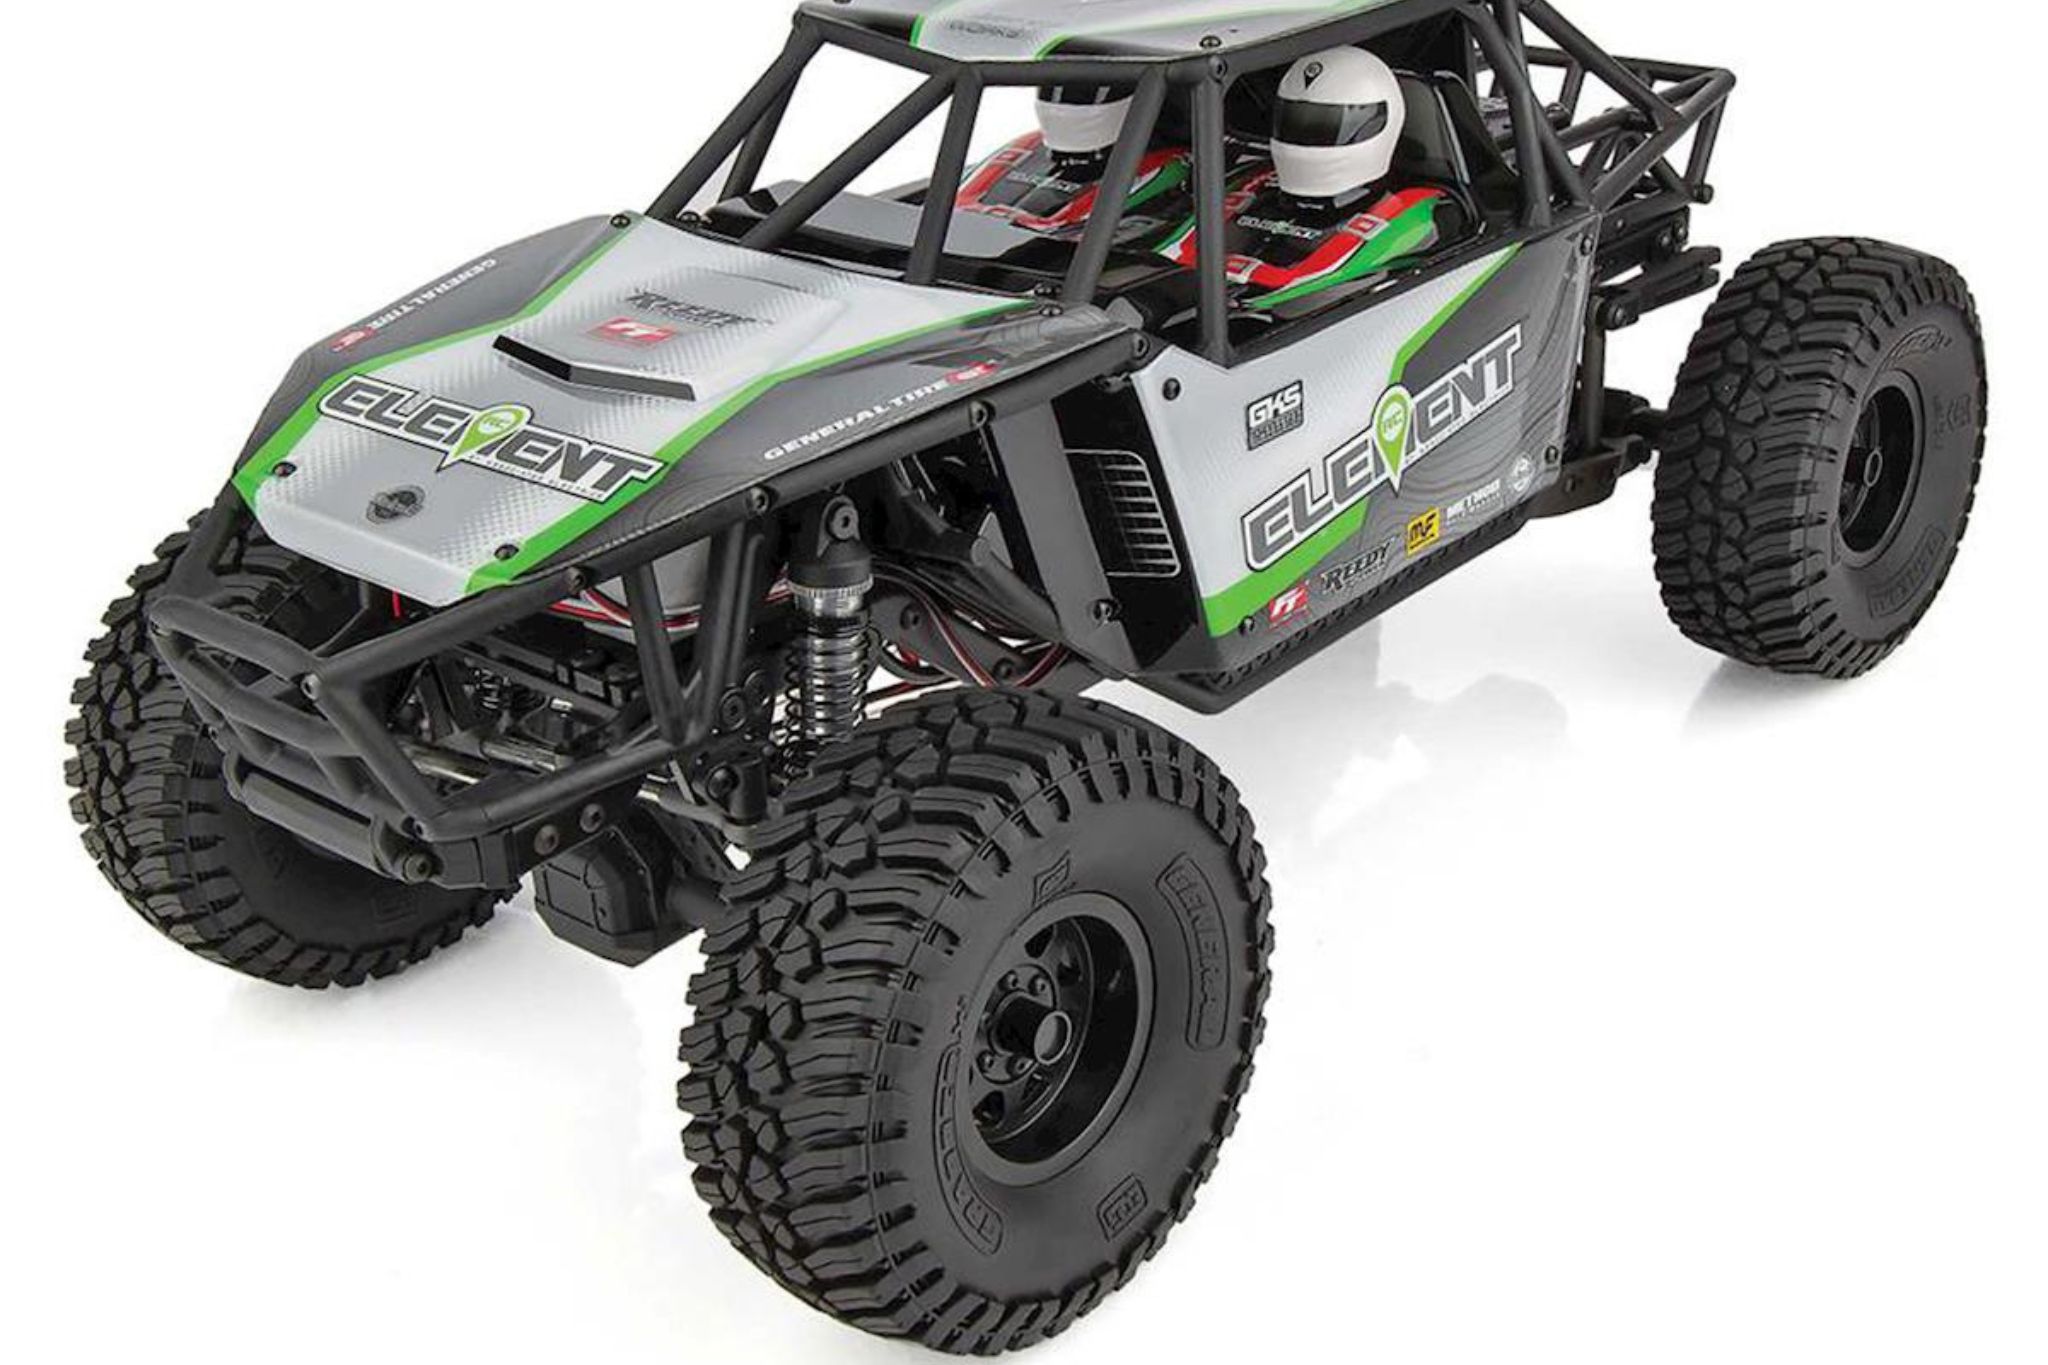 Is This REALLY The BEST Micro RC Rock Crawler Car? 